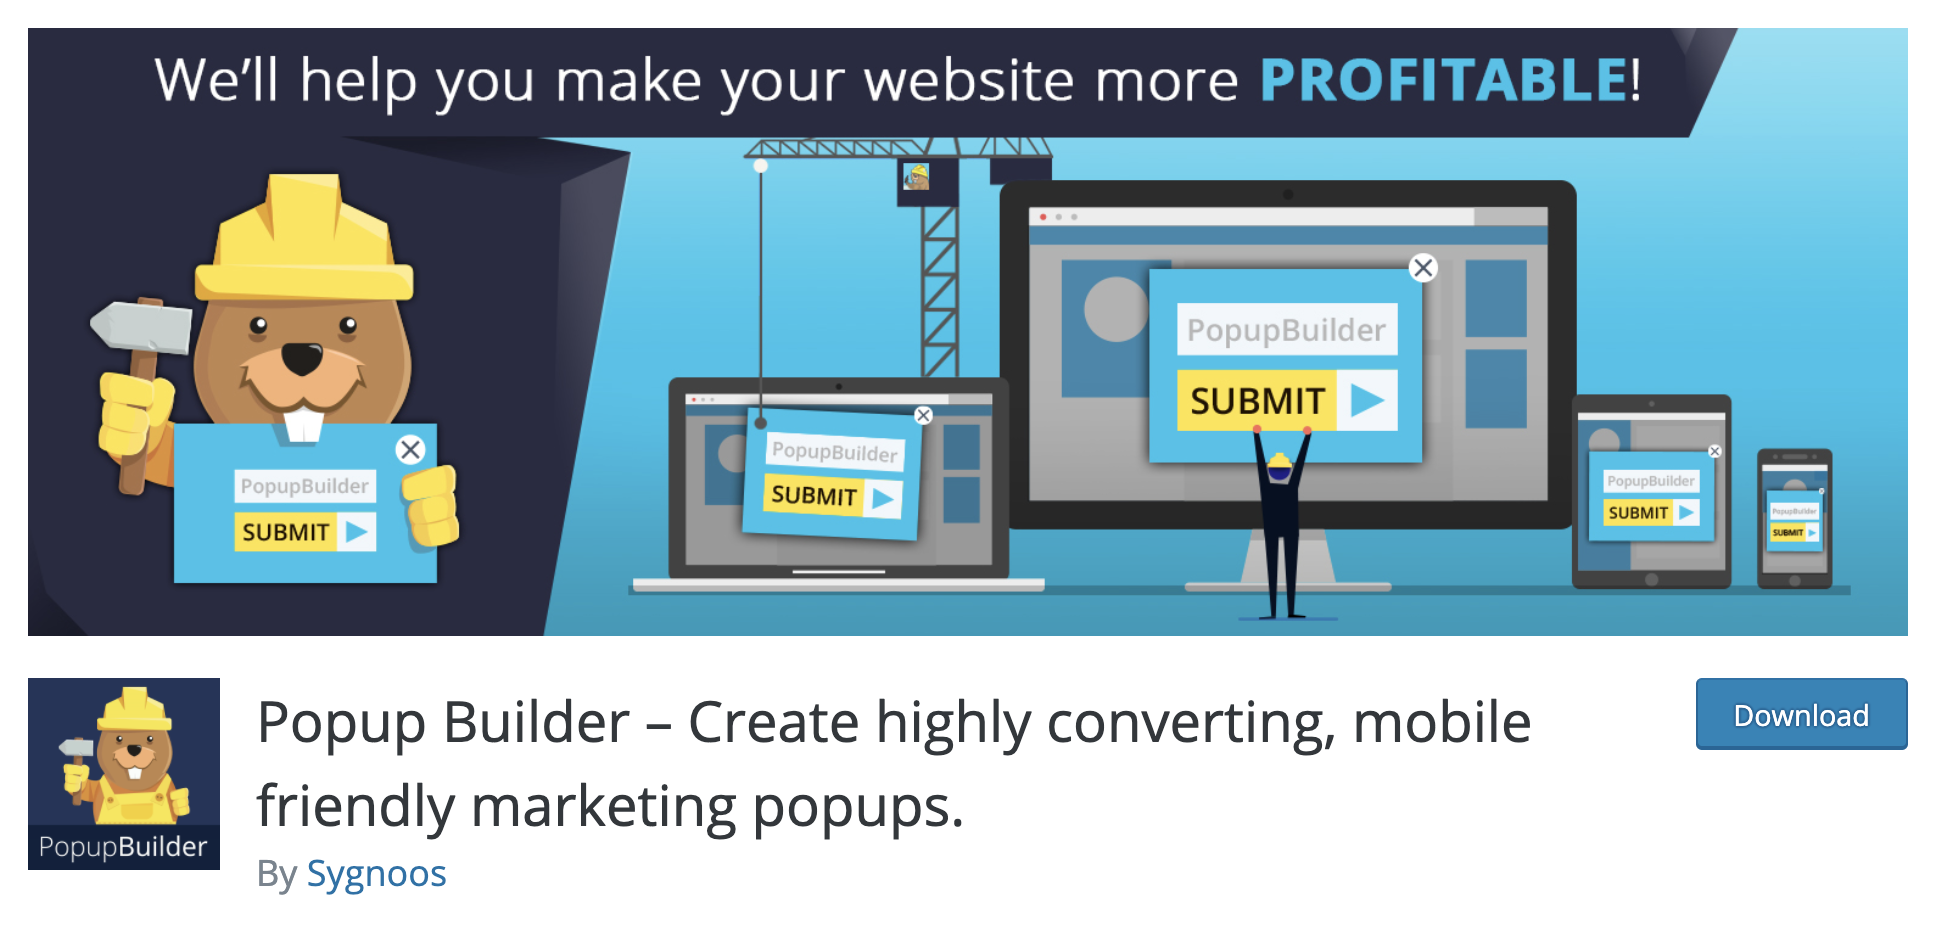 Popup Builder – Create highly converting, mobile friendly marketing popups